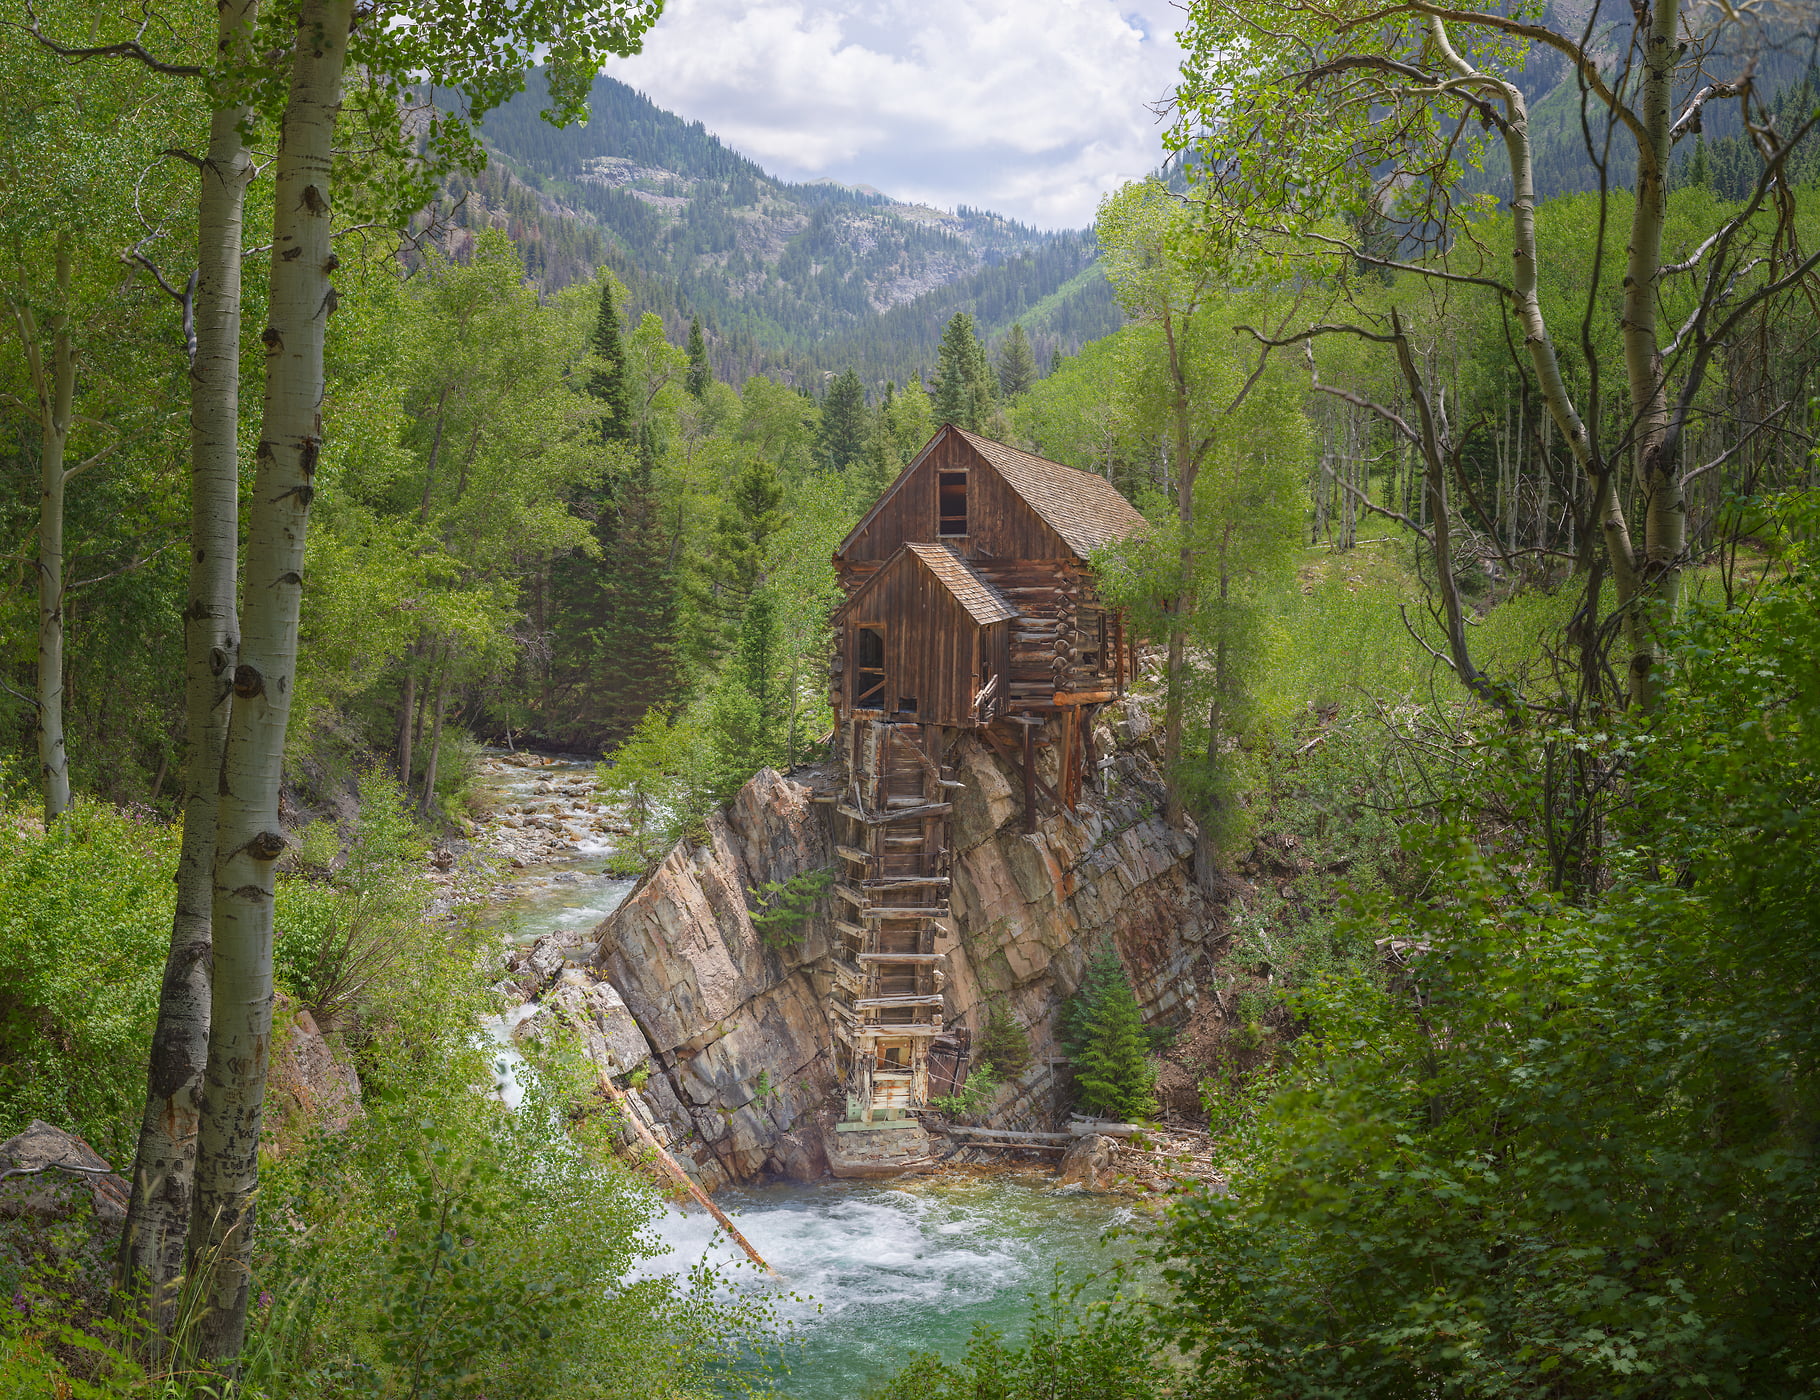 2,498 megapixels! A very high resolution, large-format VAST photo print of a rustic mill next to a stream in the woods; nature photograph created by John Freeman in Crystal Colorado.